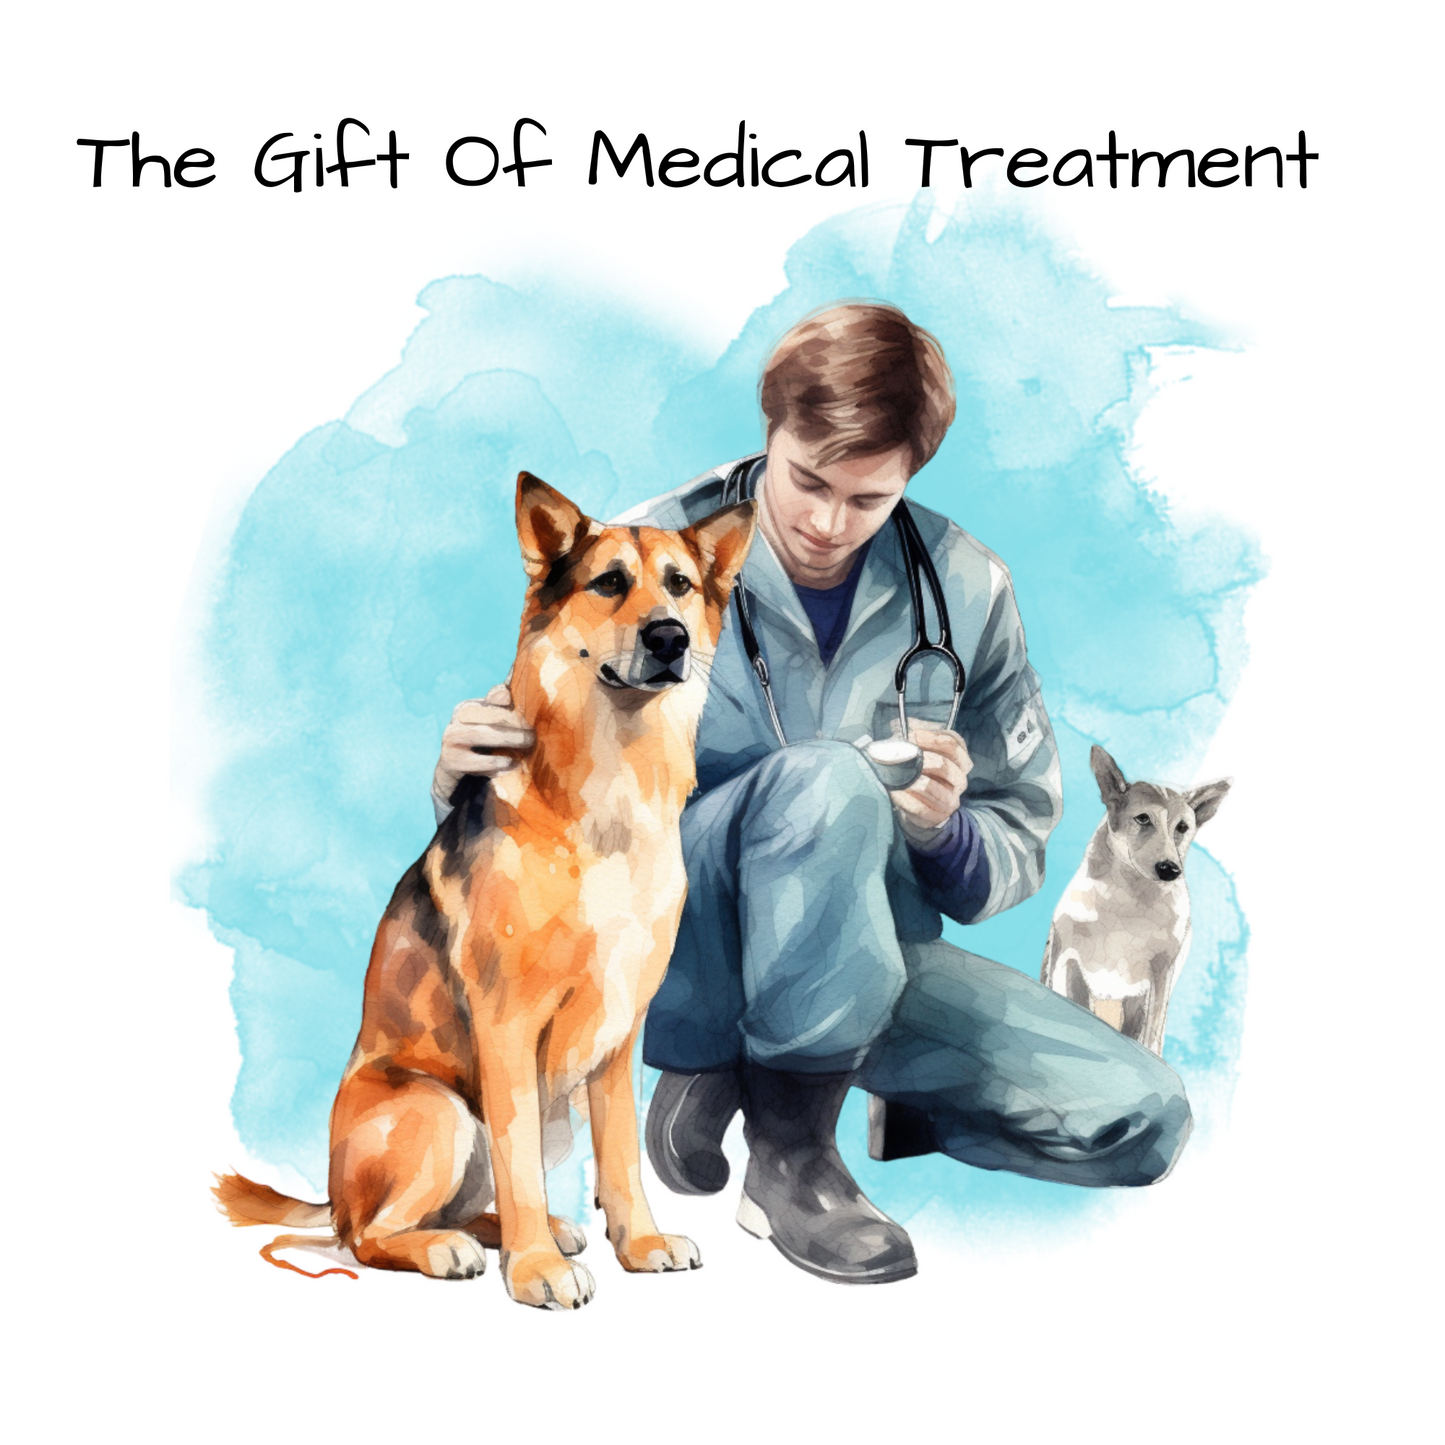 Medical Treatment For A Homeless Dog Virtual Gift